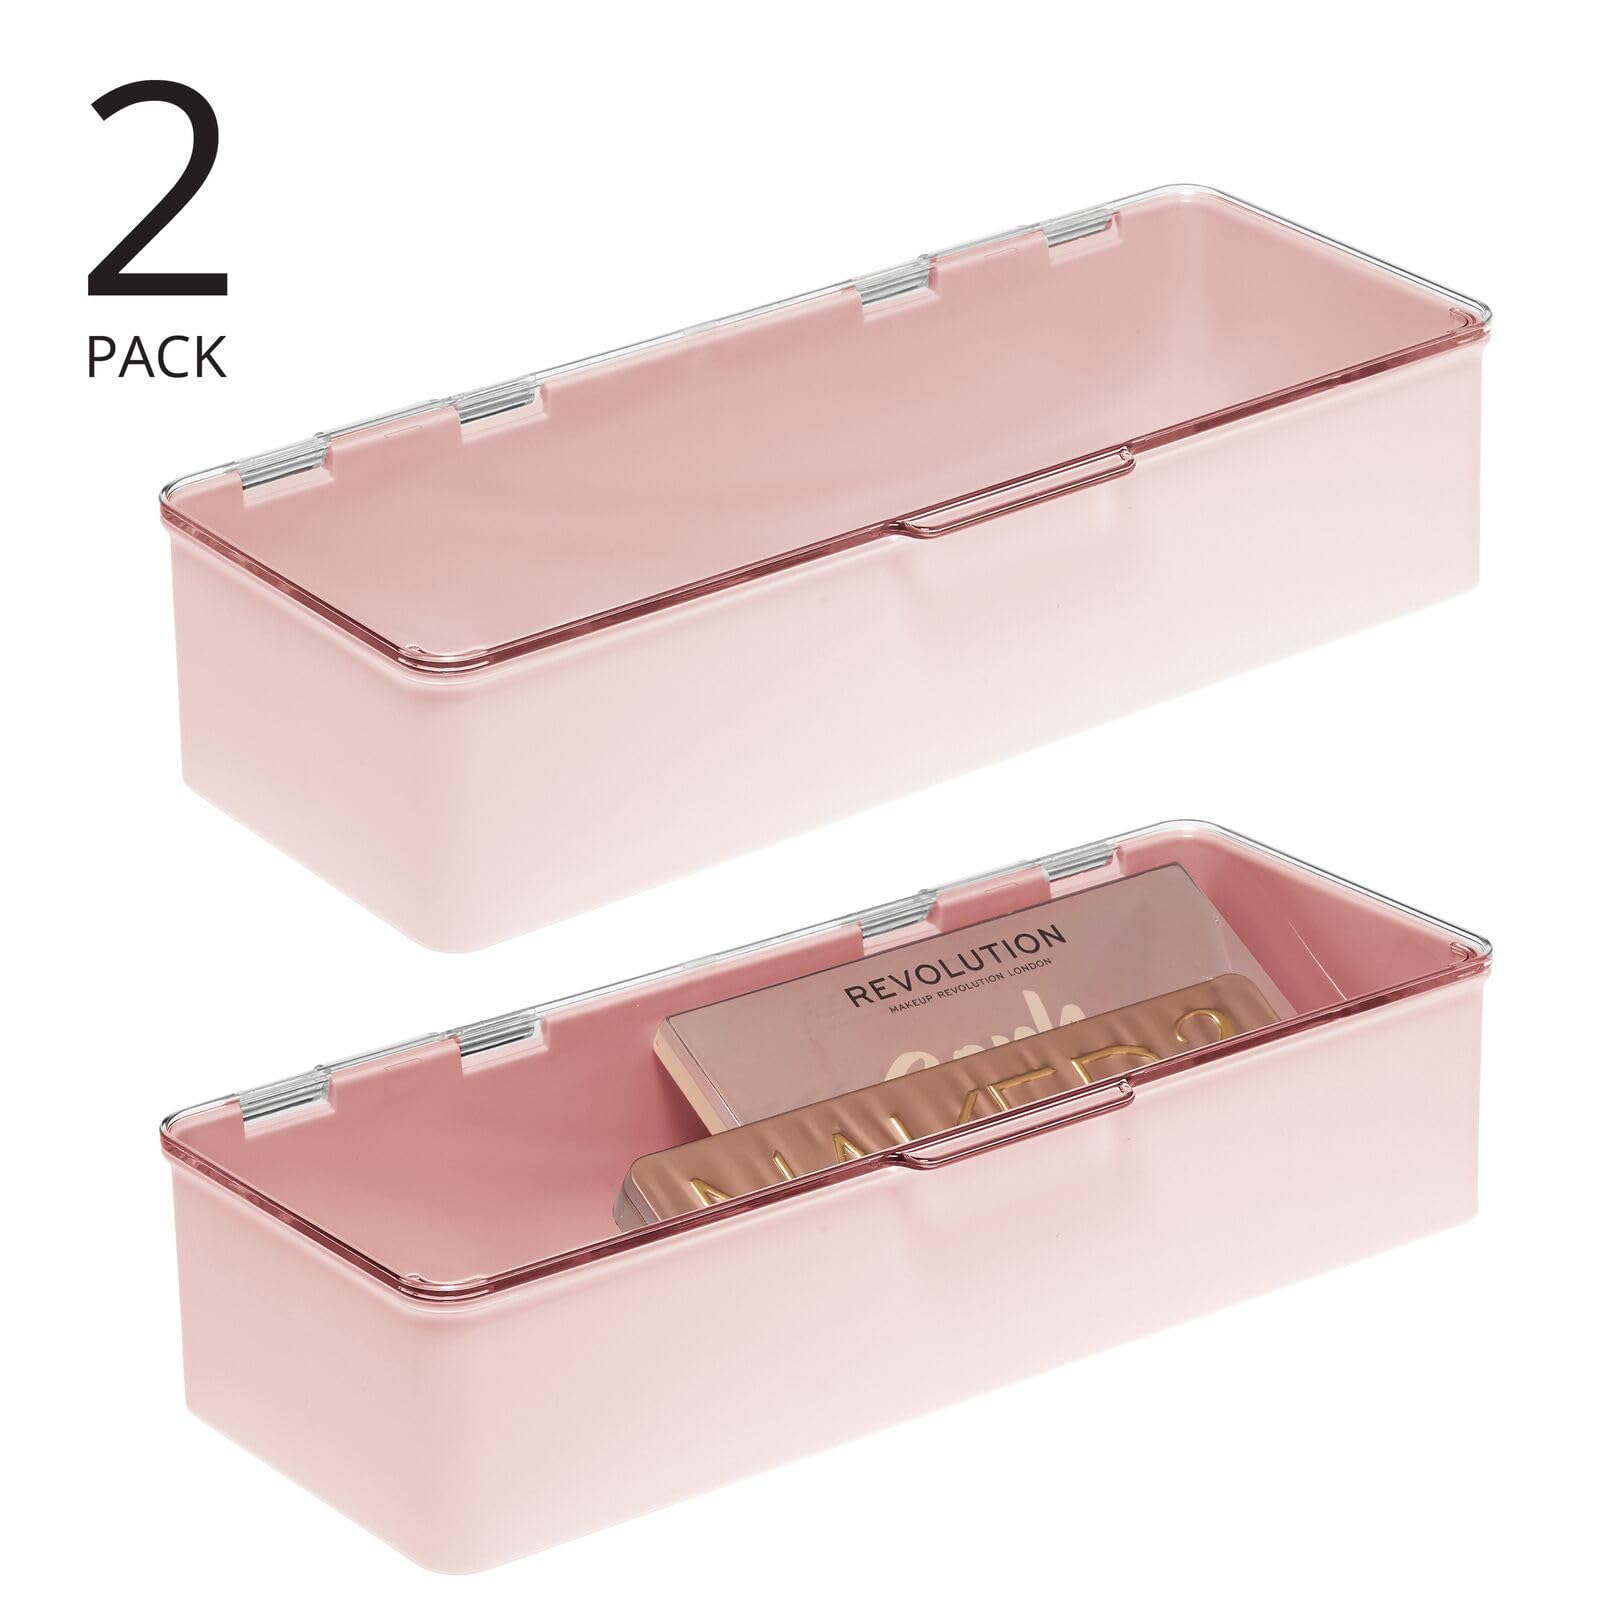 mDesign Long Plastic Cosmetic Storage Organizer Box Containers with Hinged Lid for Bedroom, Bathroom Vanity Shelf or Cabinet, Holds Masks, Palettes, Lotion, or Nail Polish, 2 Pack - Light Pink/Clear